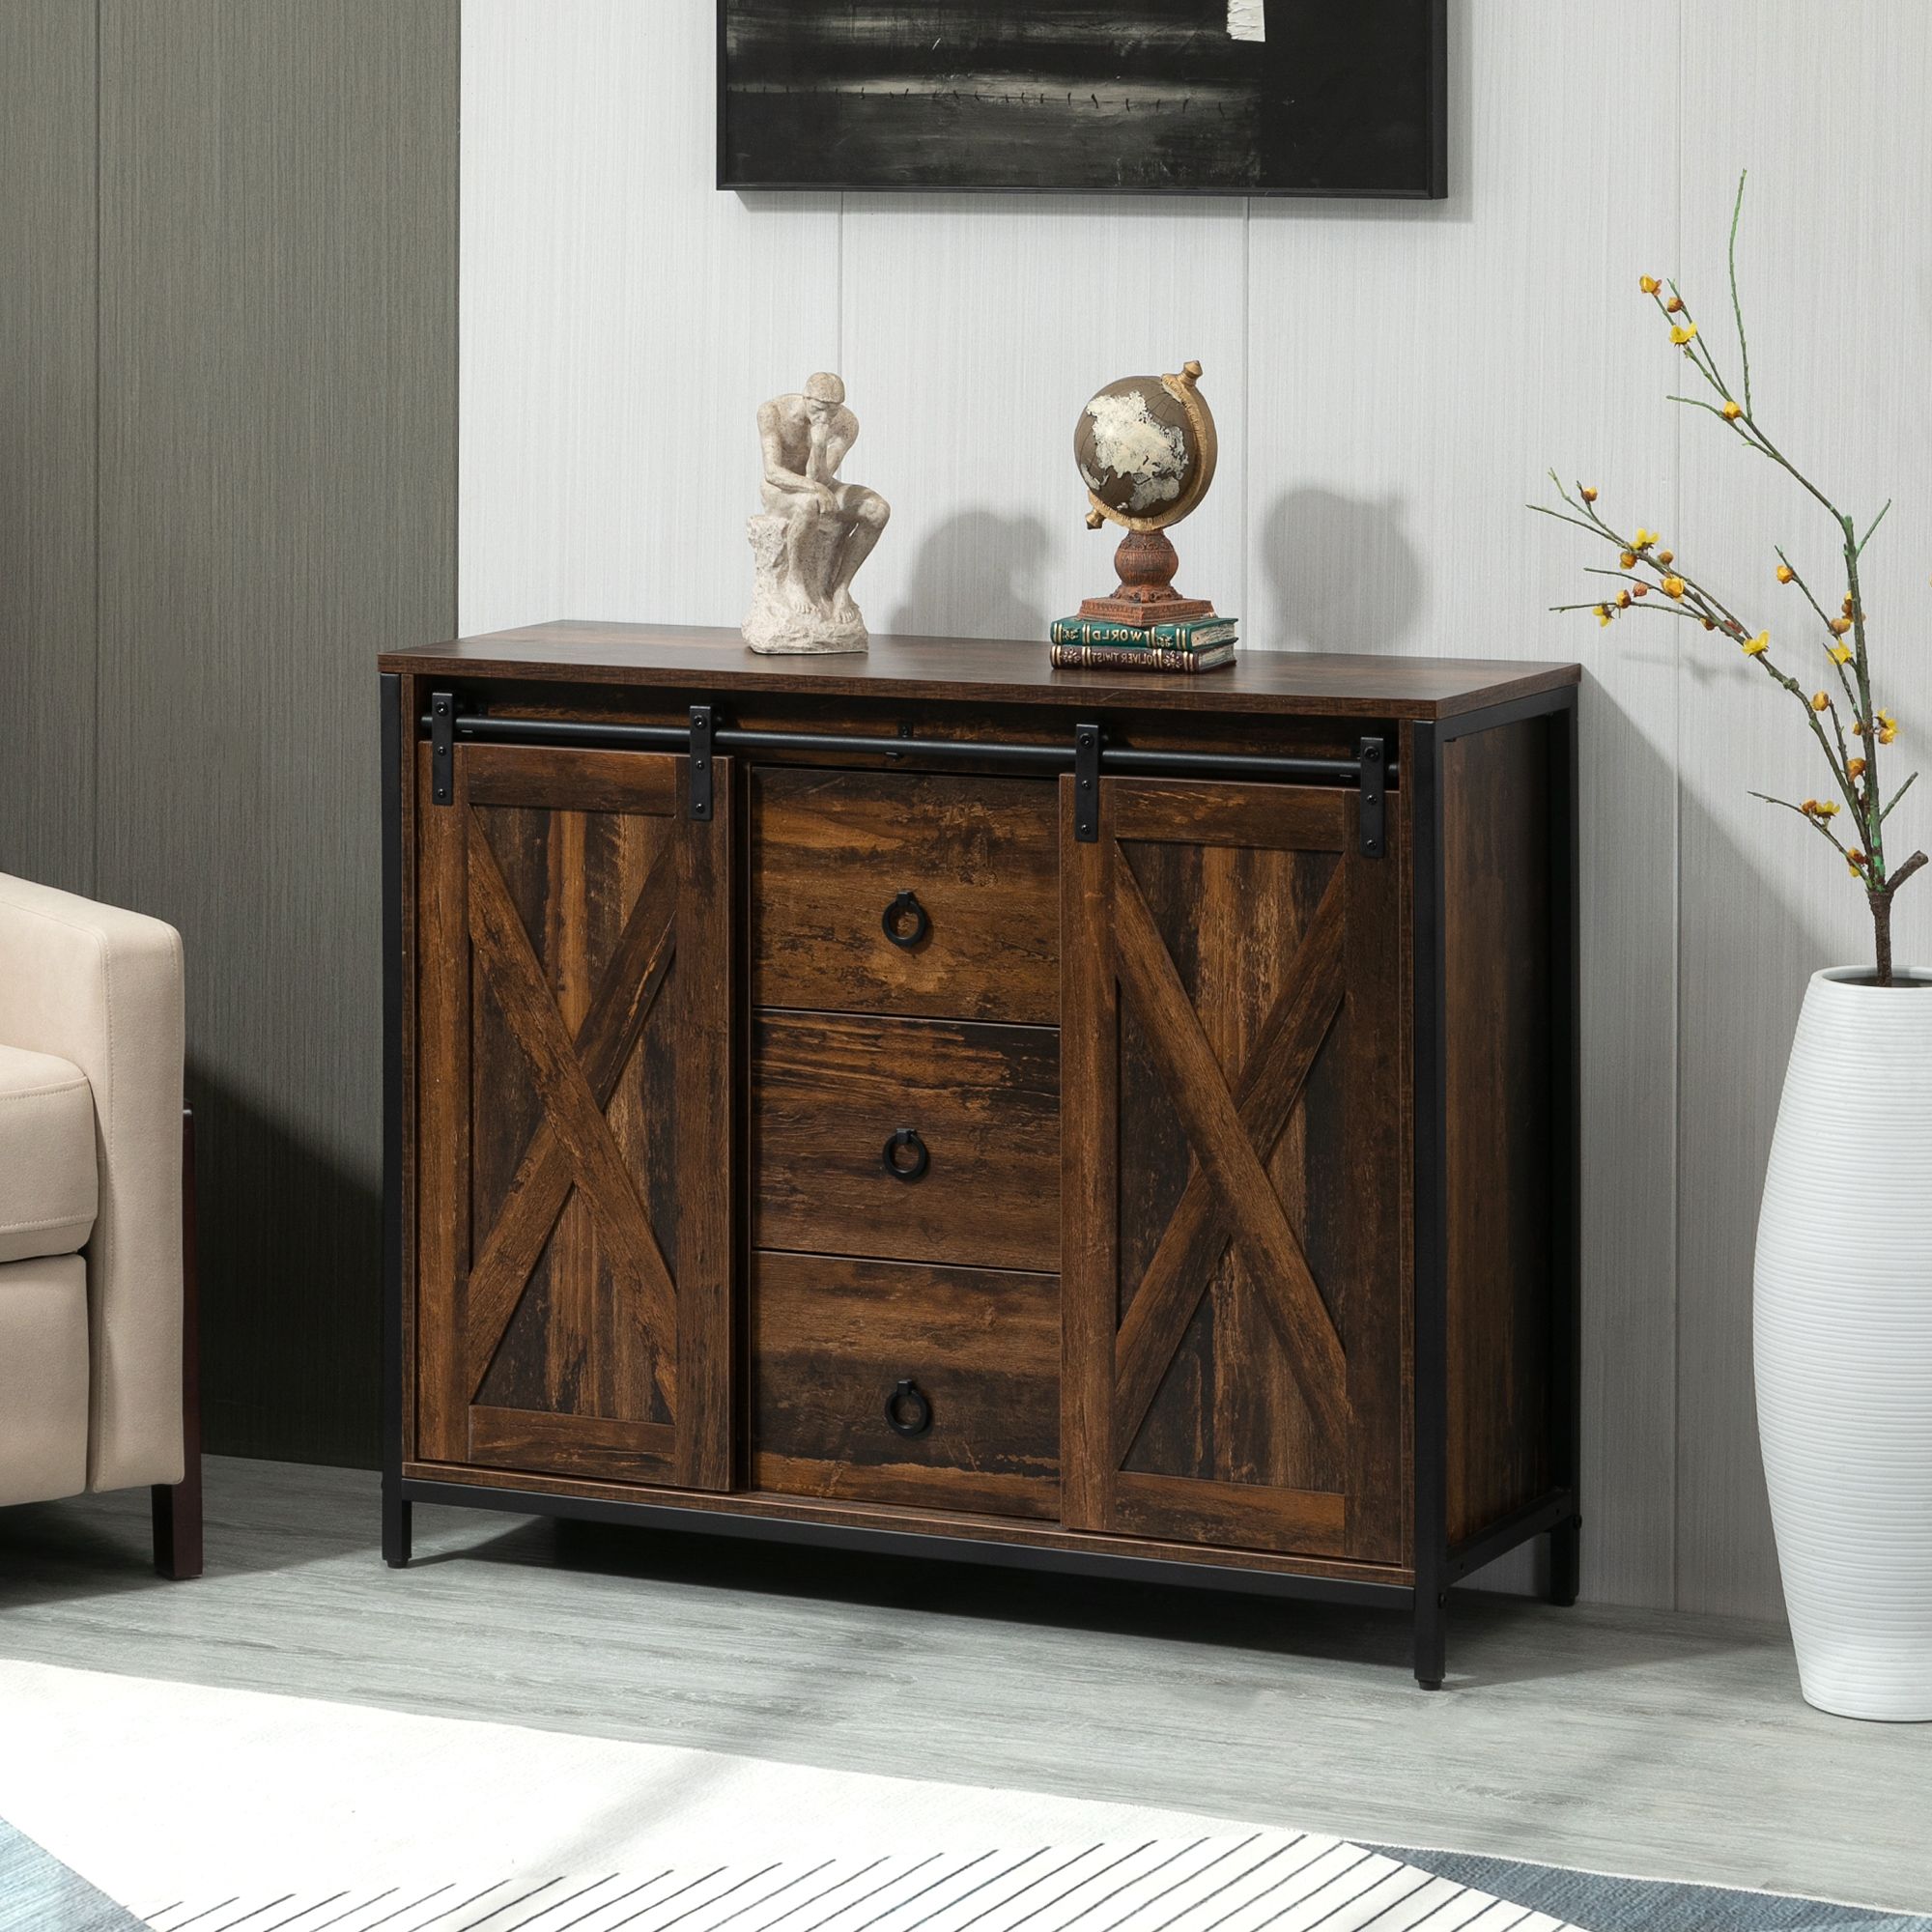 Homcom Industrial Buffet Cabinet, Kitchen Sideboard With Sliding Barn Doors,  Three Drawers And Adjustable Shelves For Living Room, Dining Room, Rustic  Brown | Aosom Canada For Sideboards Double Barn Door Buffet (Gallery 19 of 20)